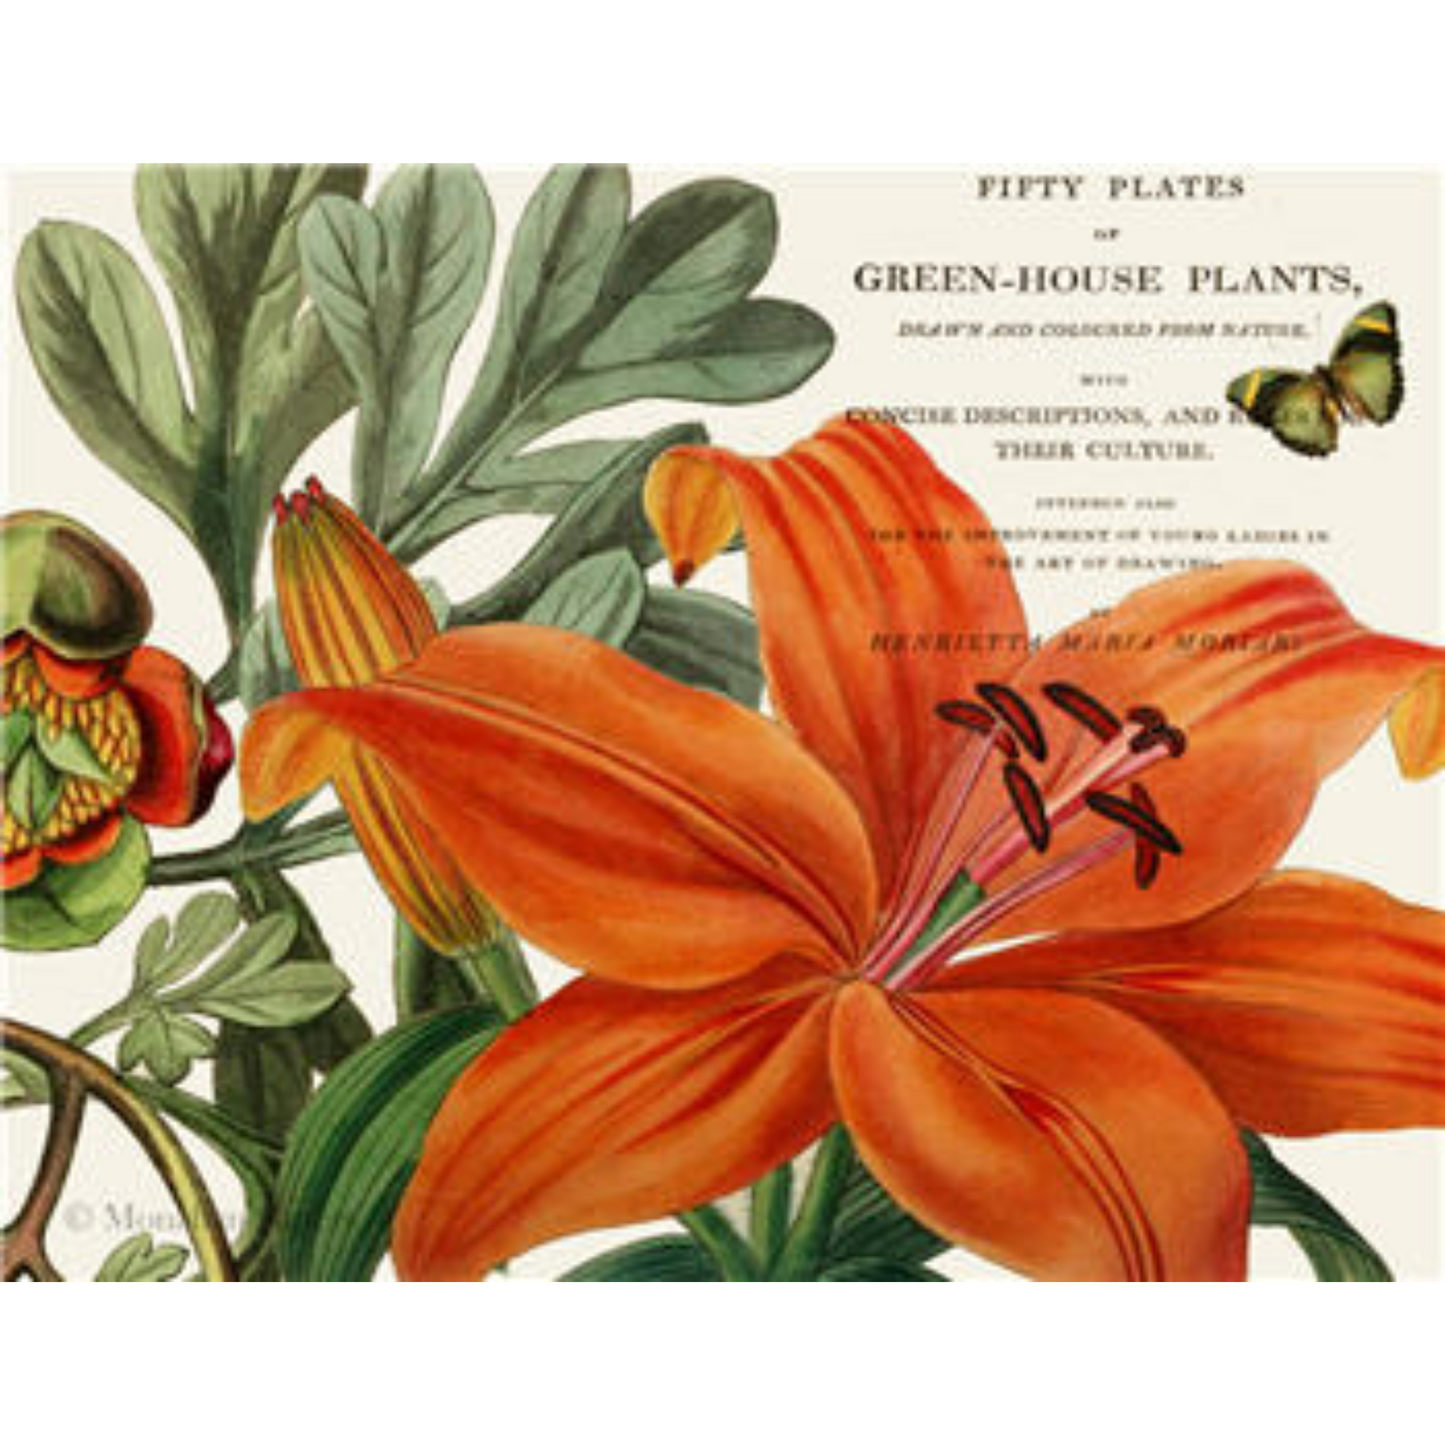 Orange Lily & Butterfly - Floral Decoupage Paper by Monahan Papers. 11" x 17" available at Milton's Daughter.